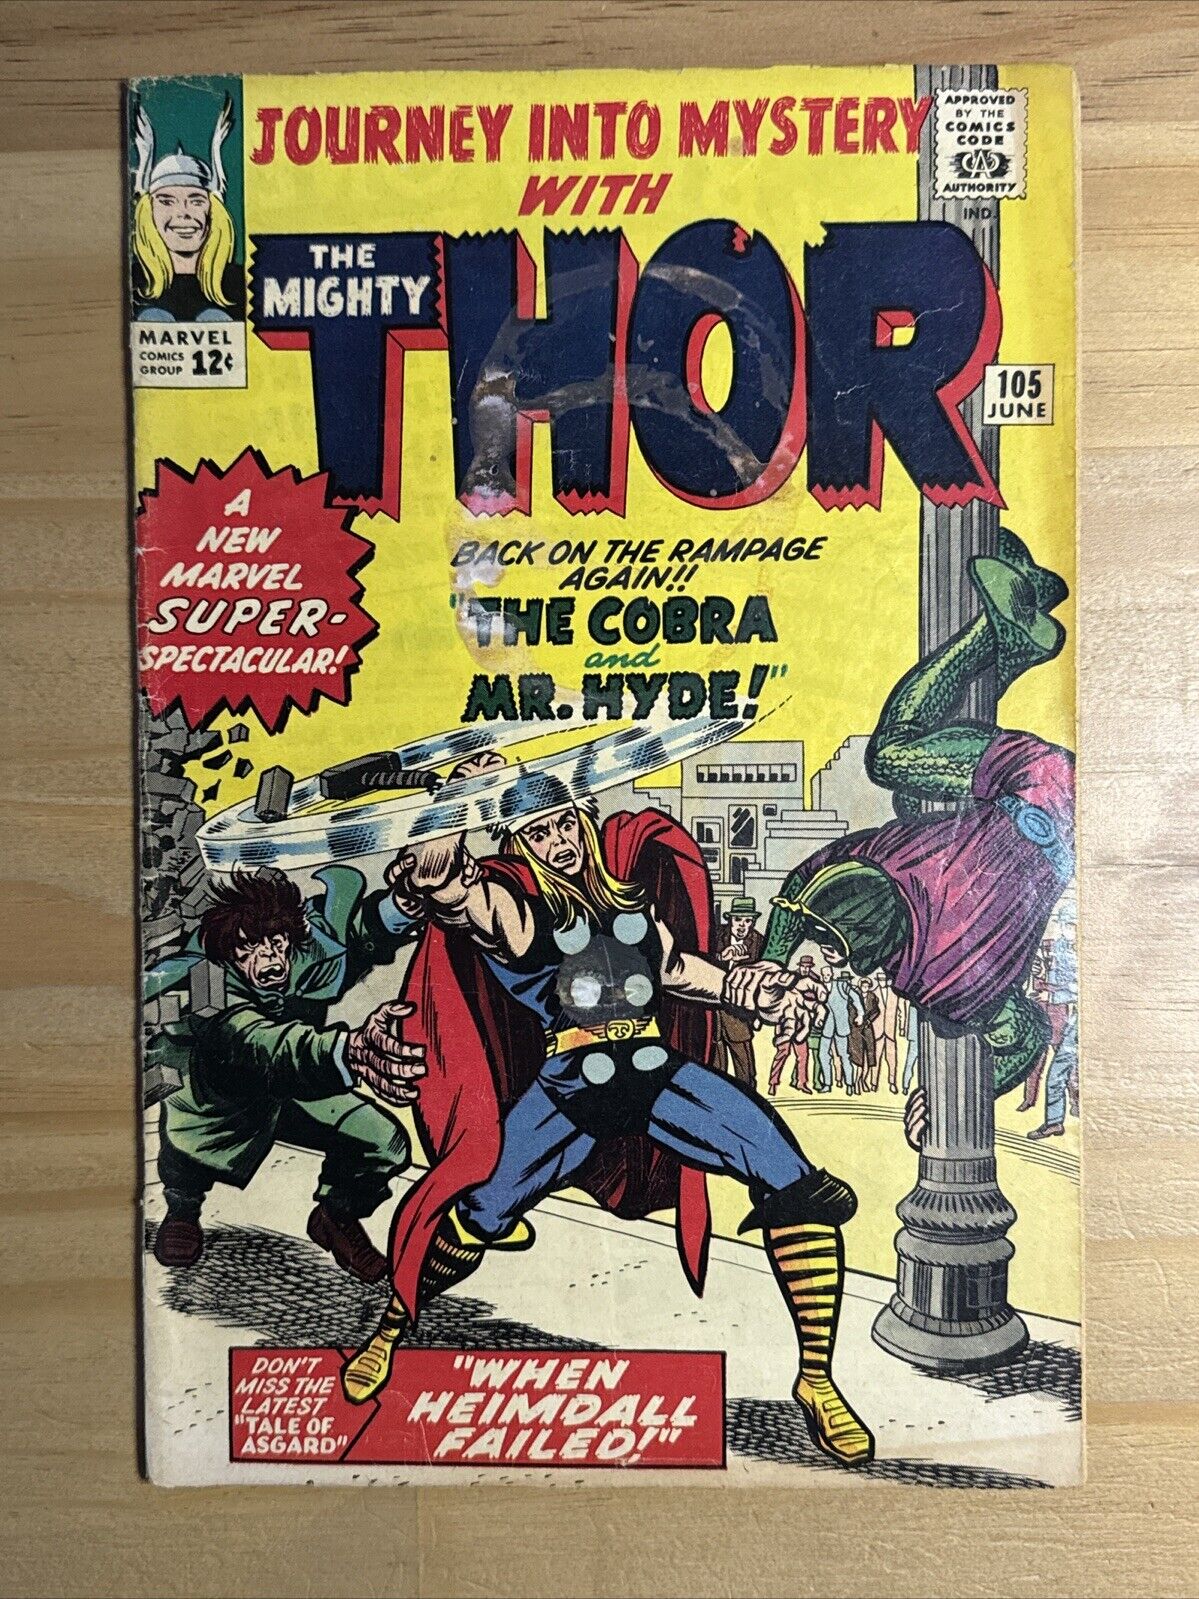 Journey Into Mystery Thor #105 Return of the Cobra and Mr. Hyde